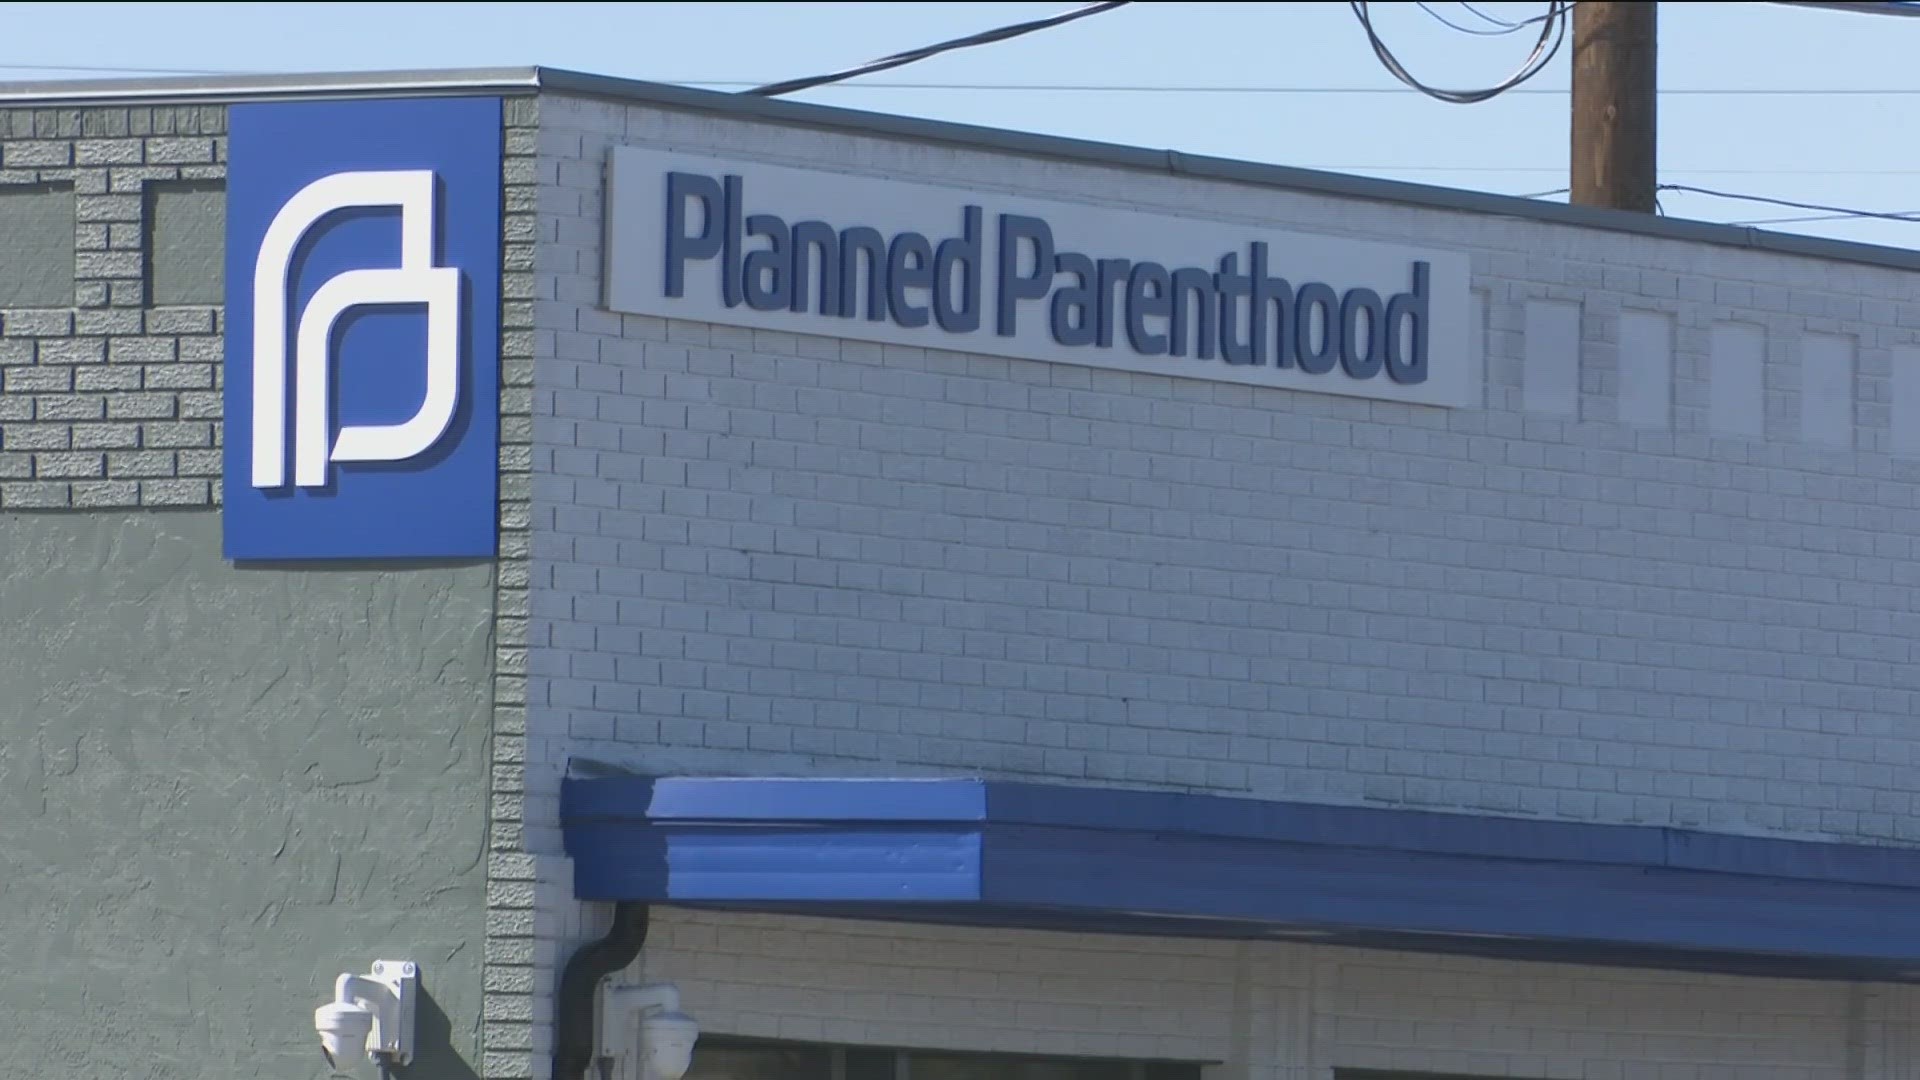 Planned Parenthood will open the clinic again from March 21-23. The official permanent opening date is undetermined, according to Planned Parenthood.